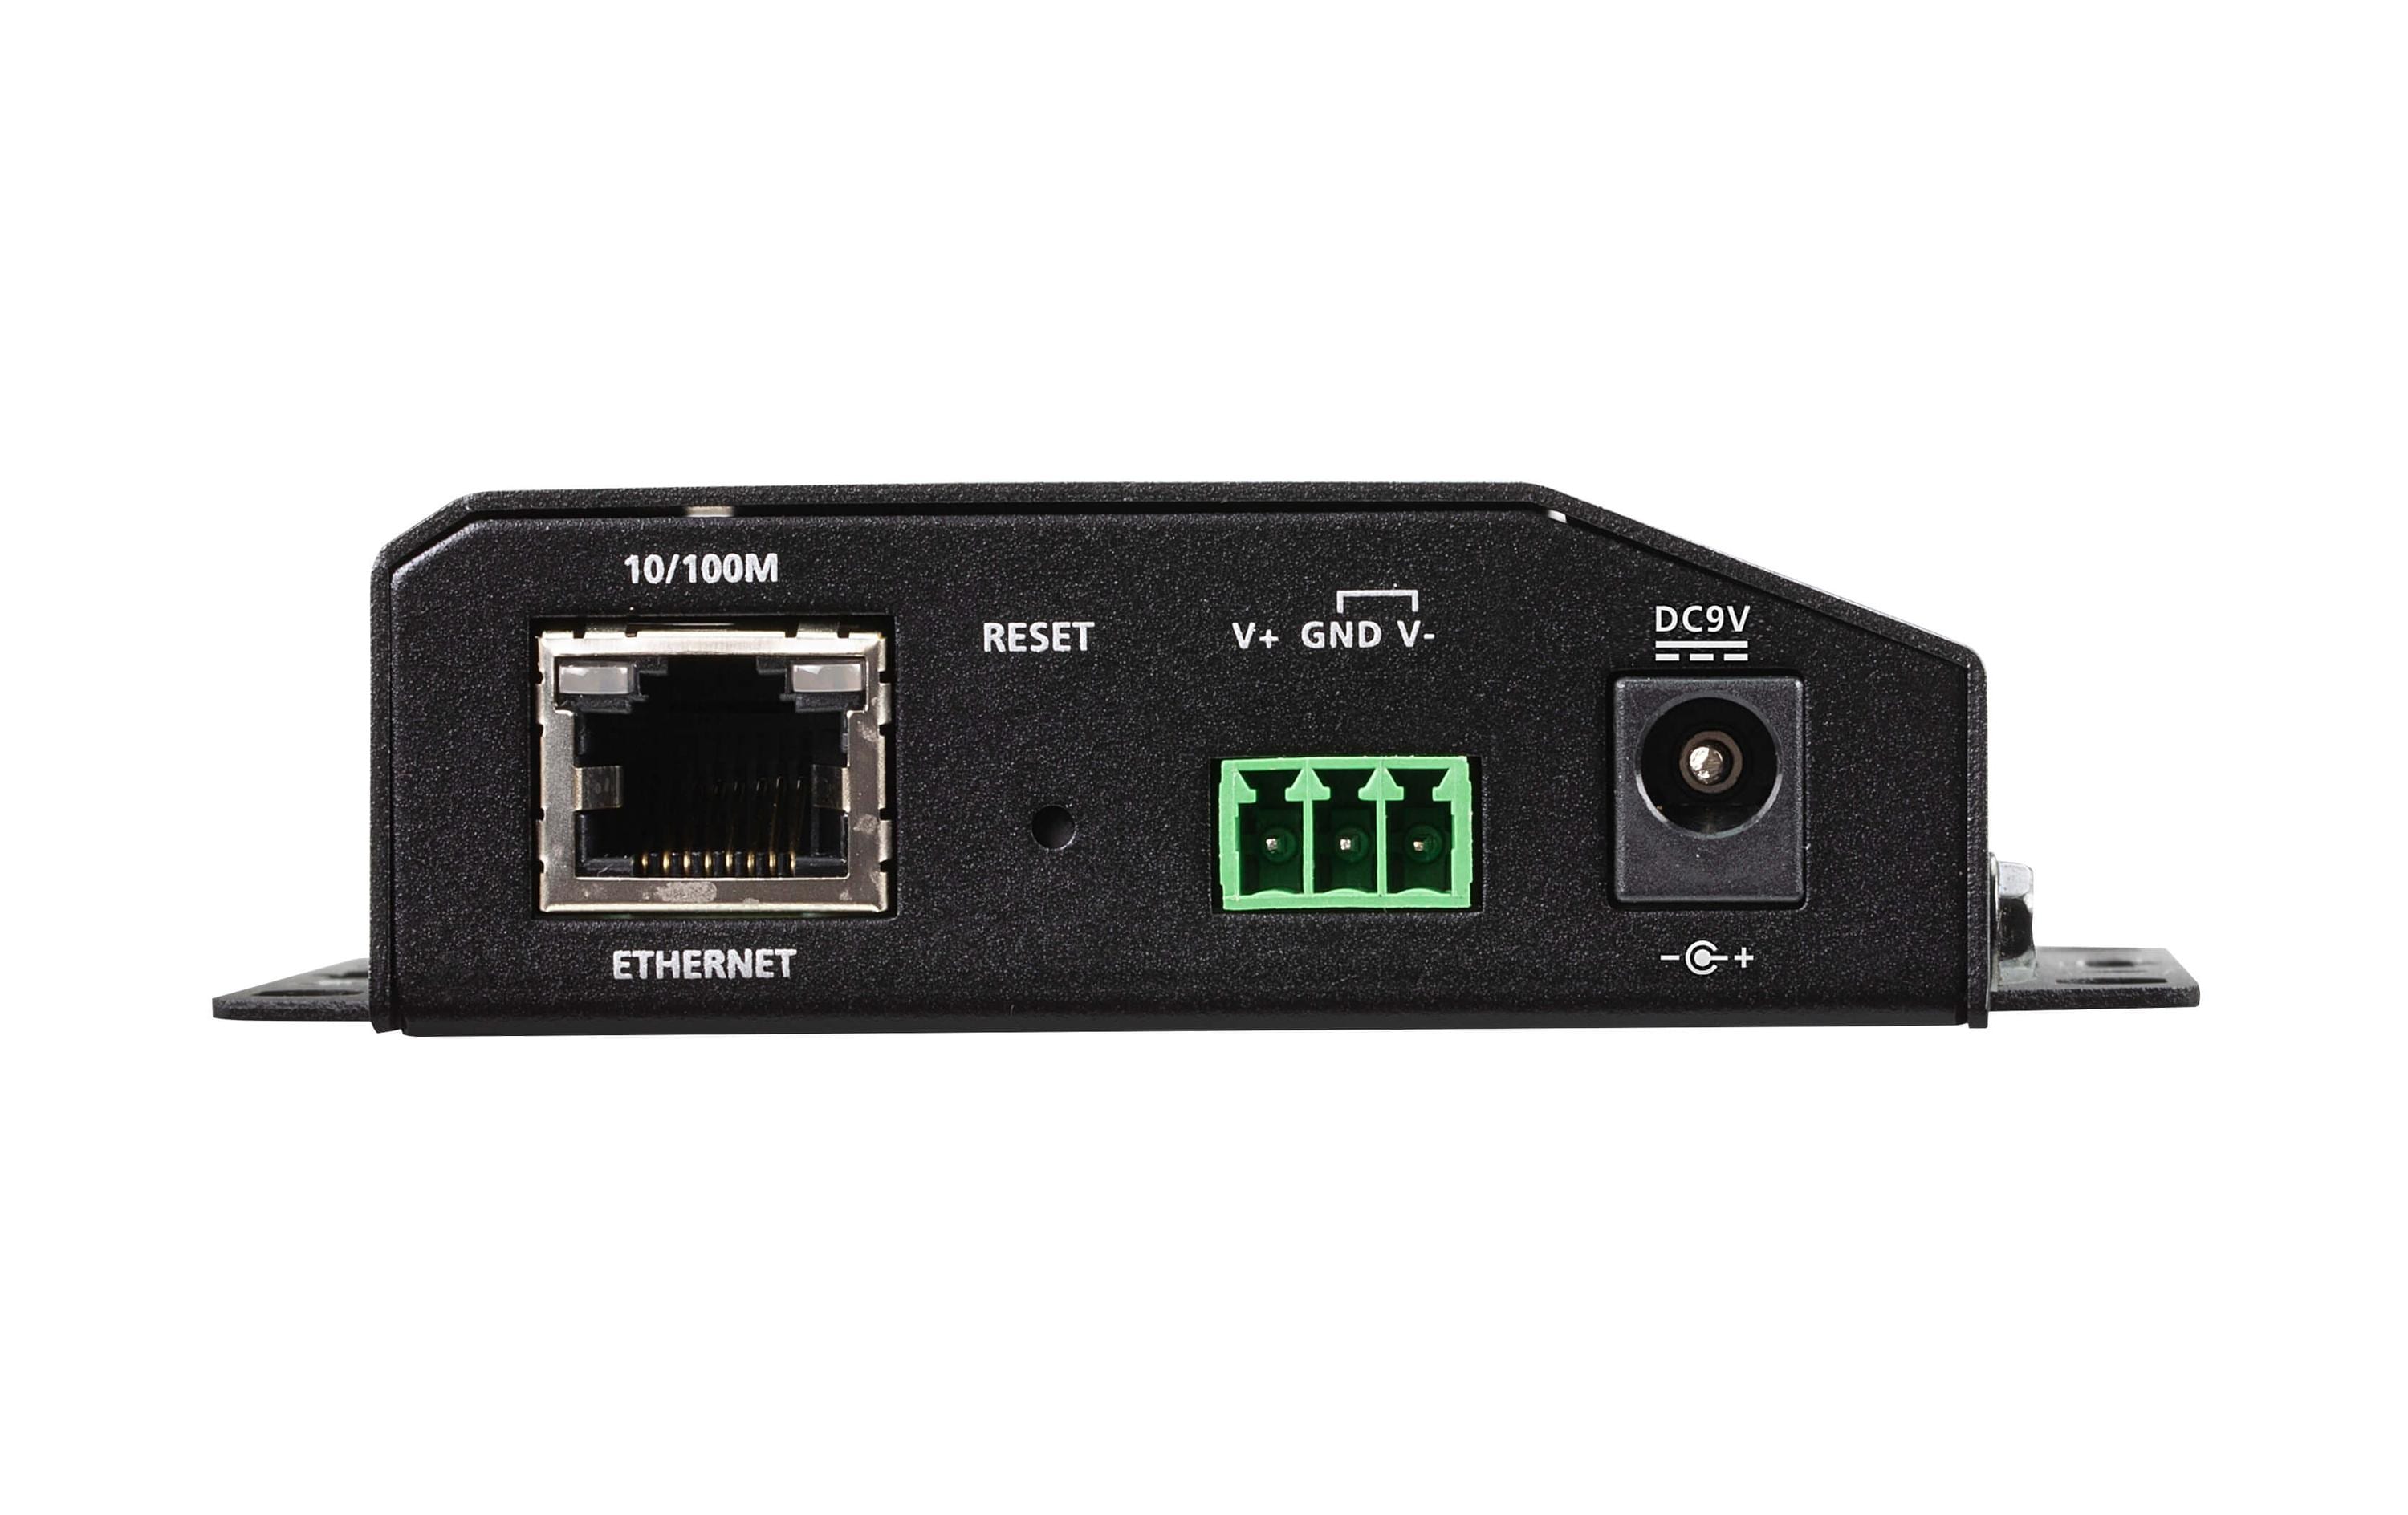 Aten RS-232-Extender SN3001 1-Port Secure Device